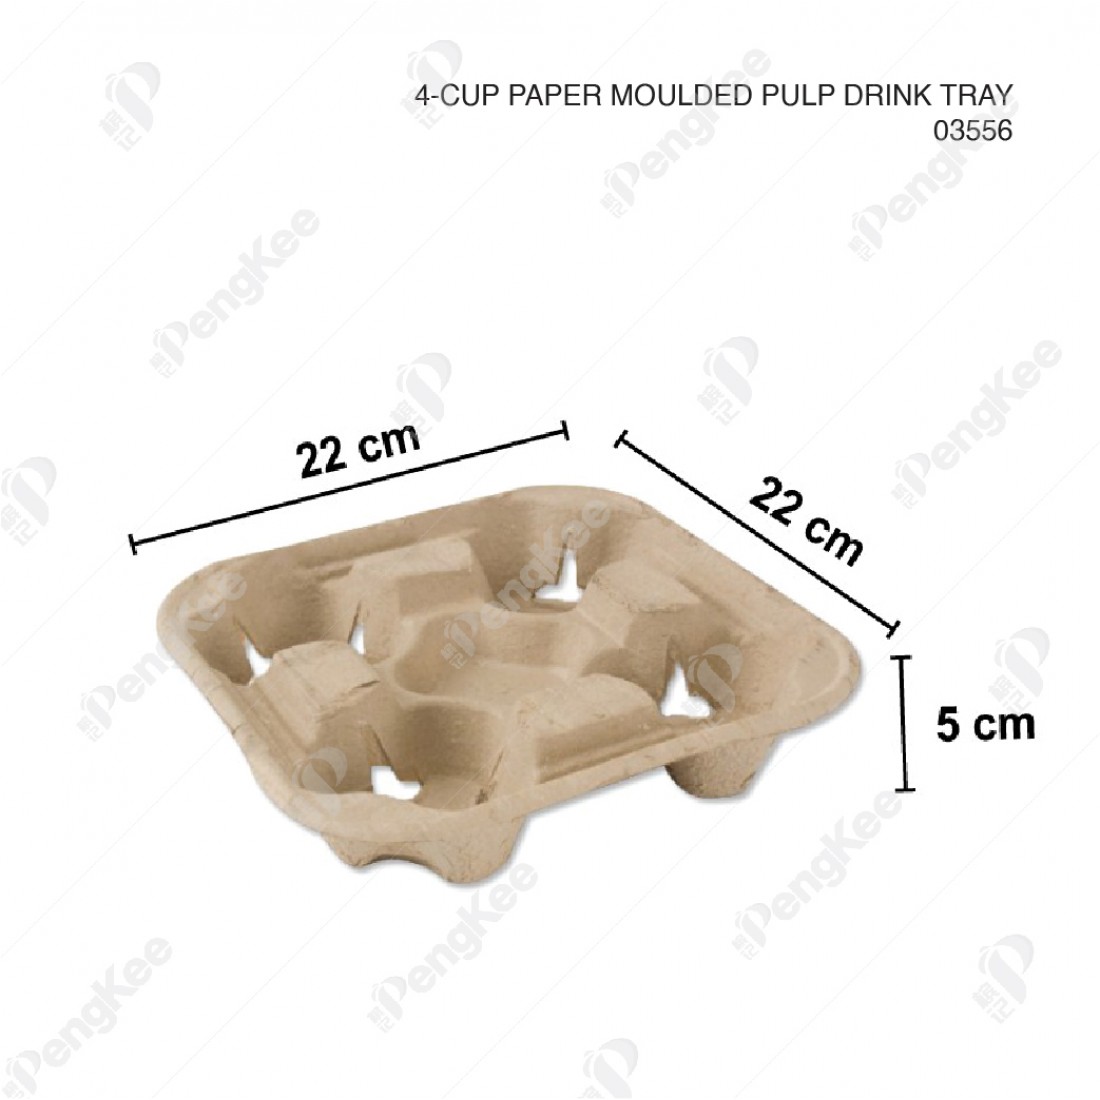 (CARTON) 4-CUP PAPER MOULDED PULP DRINK TRAY